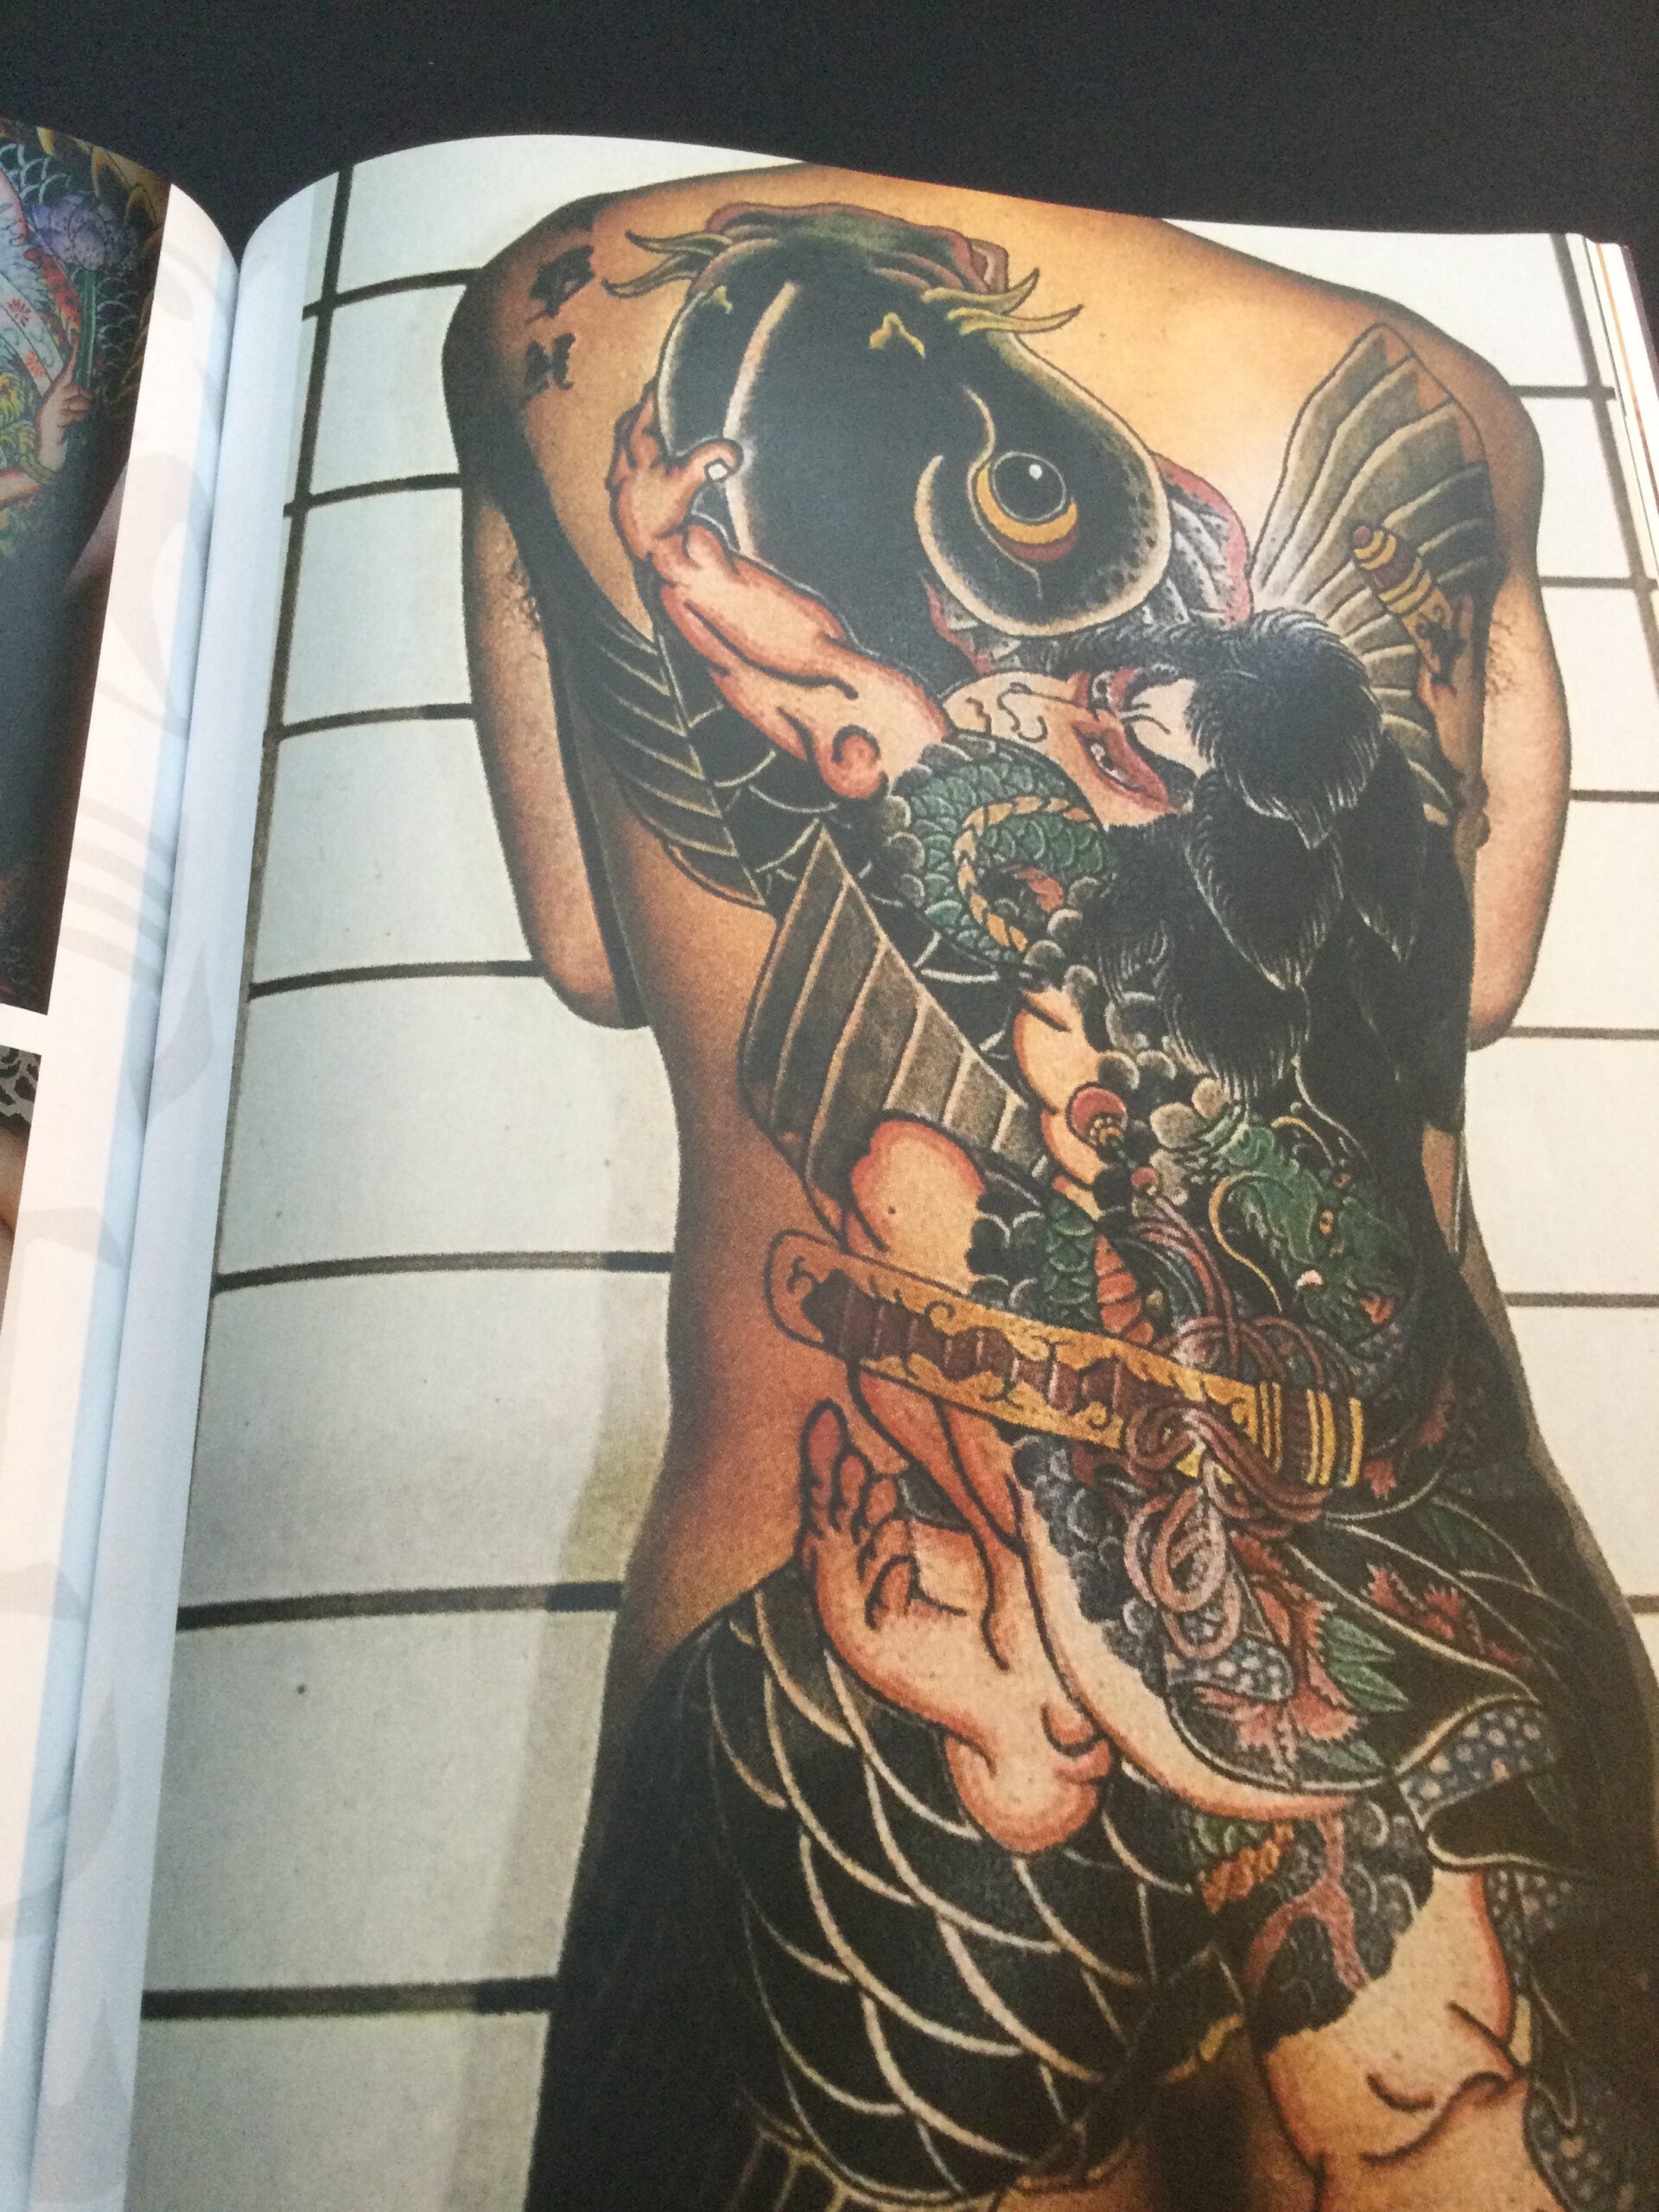 A full page picture depicting the warrior from Japan called Tanmeijiro Genshogo